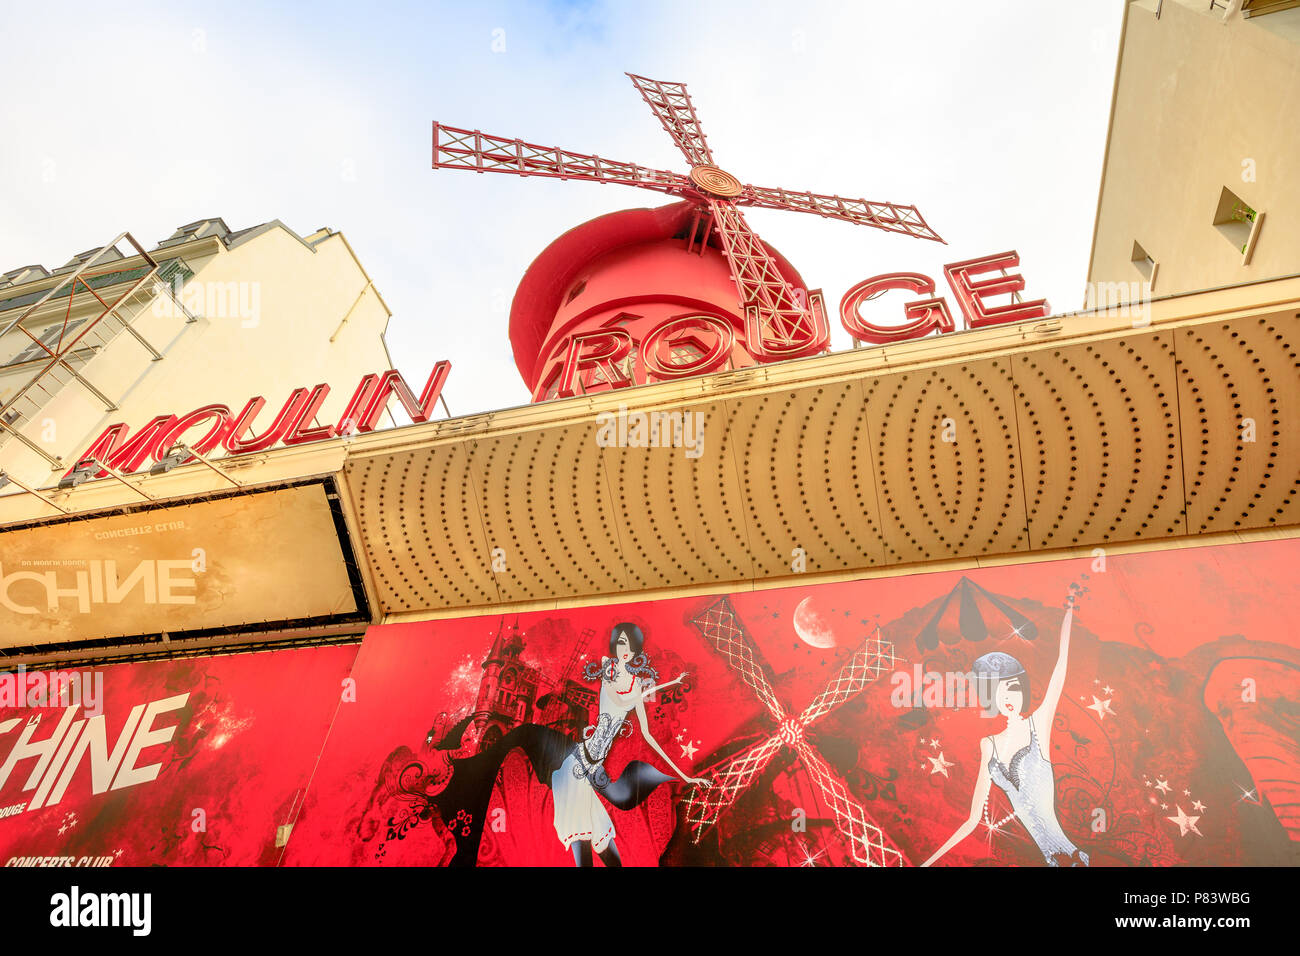 Paris, France - July 1, 2017: signboard of the Moulin Rouge nightclub and historical theater, most famous cabaret attraction of Paris. The Moulin Rouge is a symbol of Pigalle District. Stock Photo